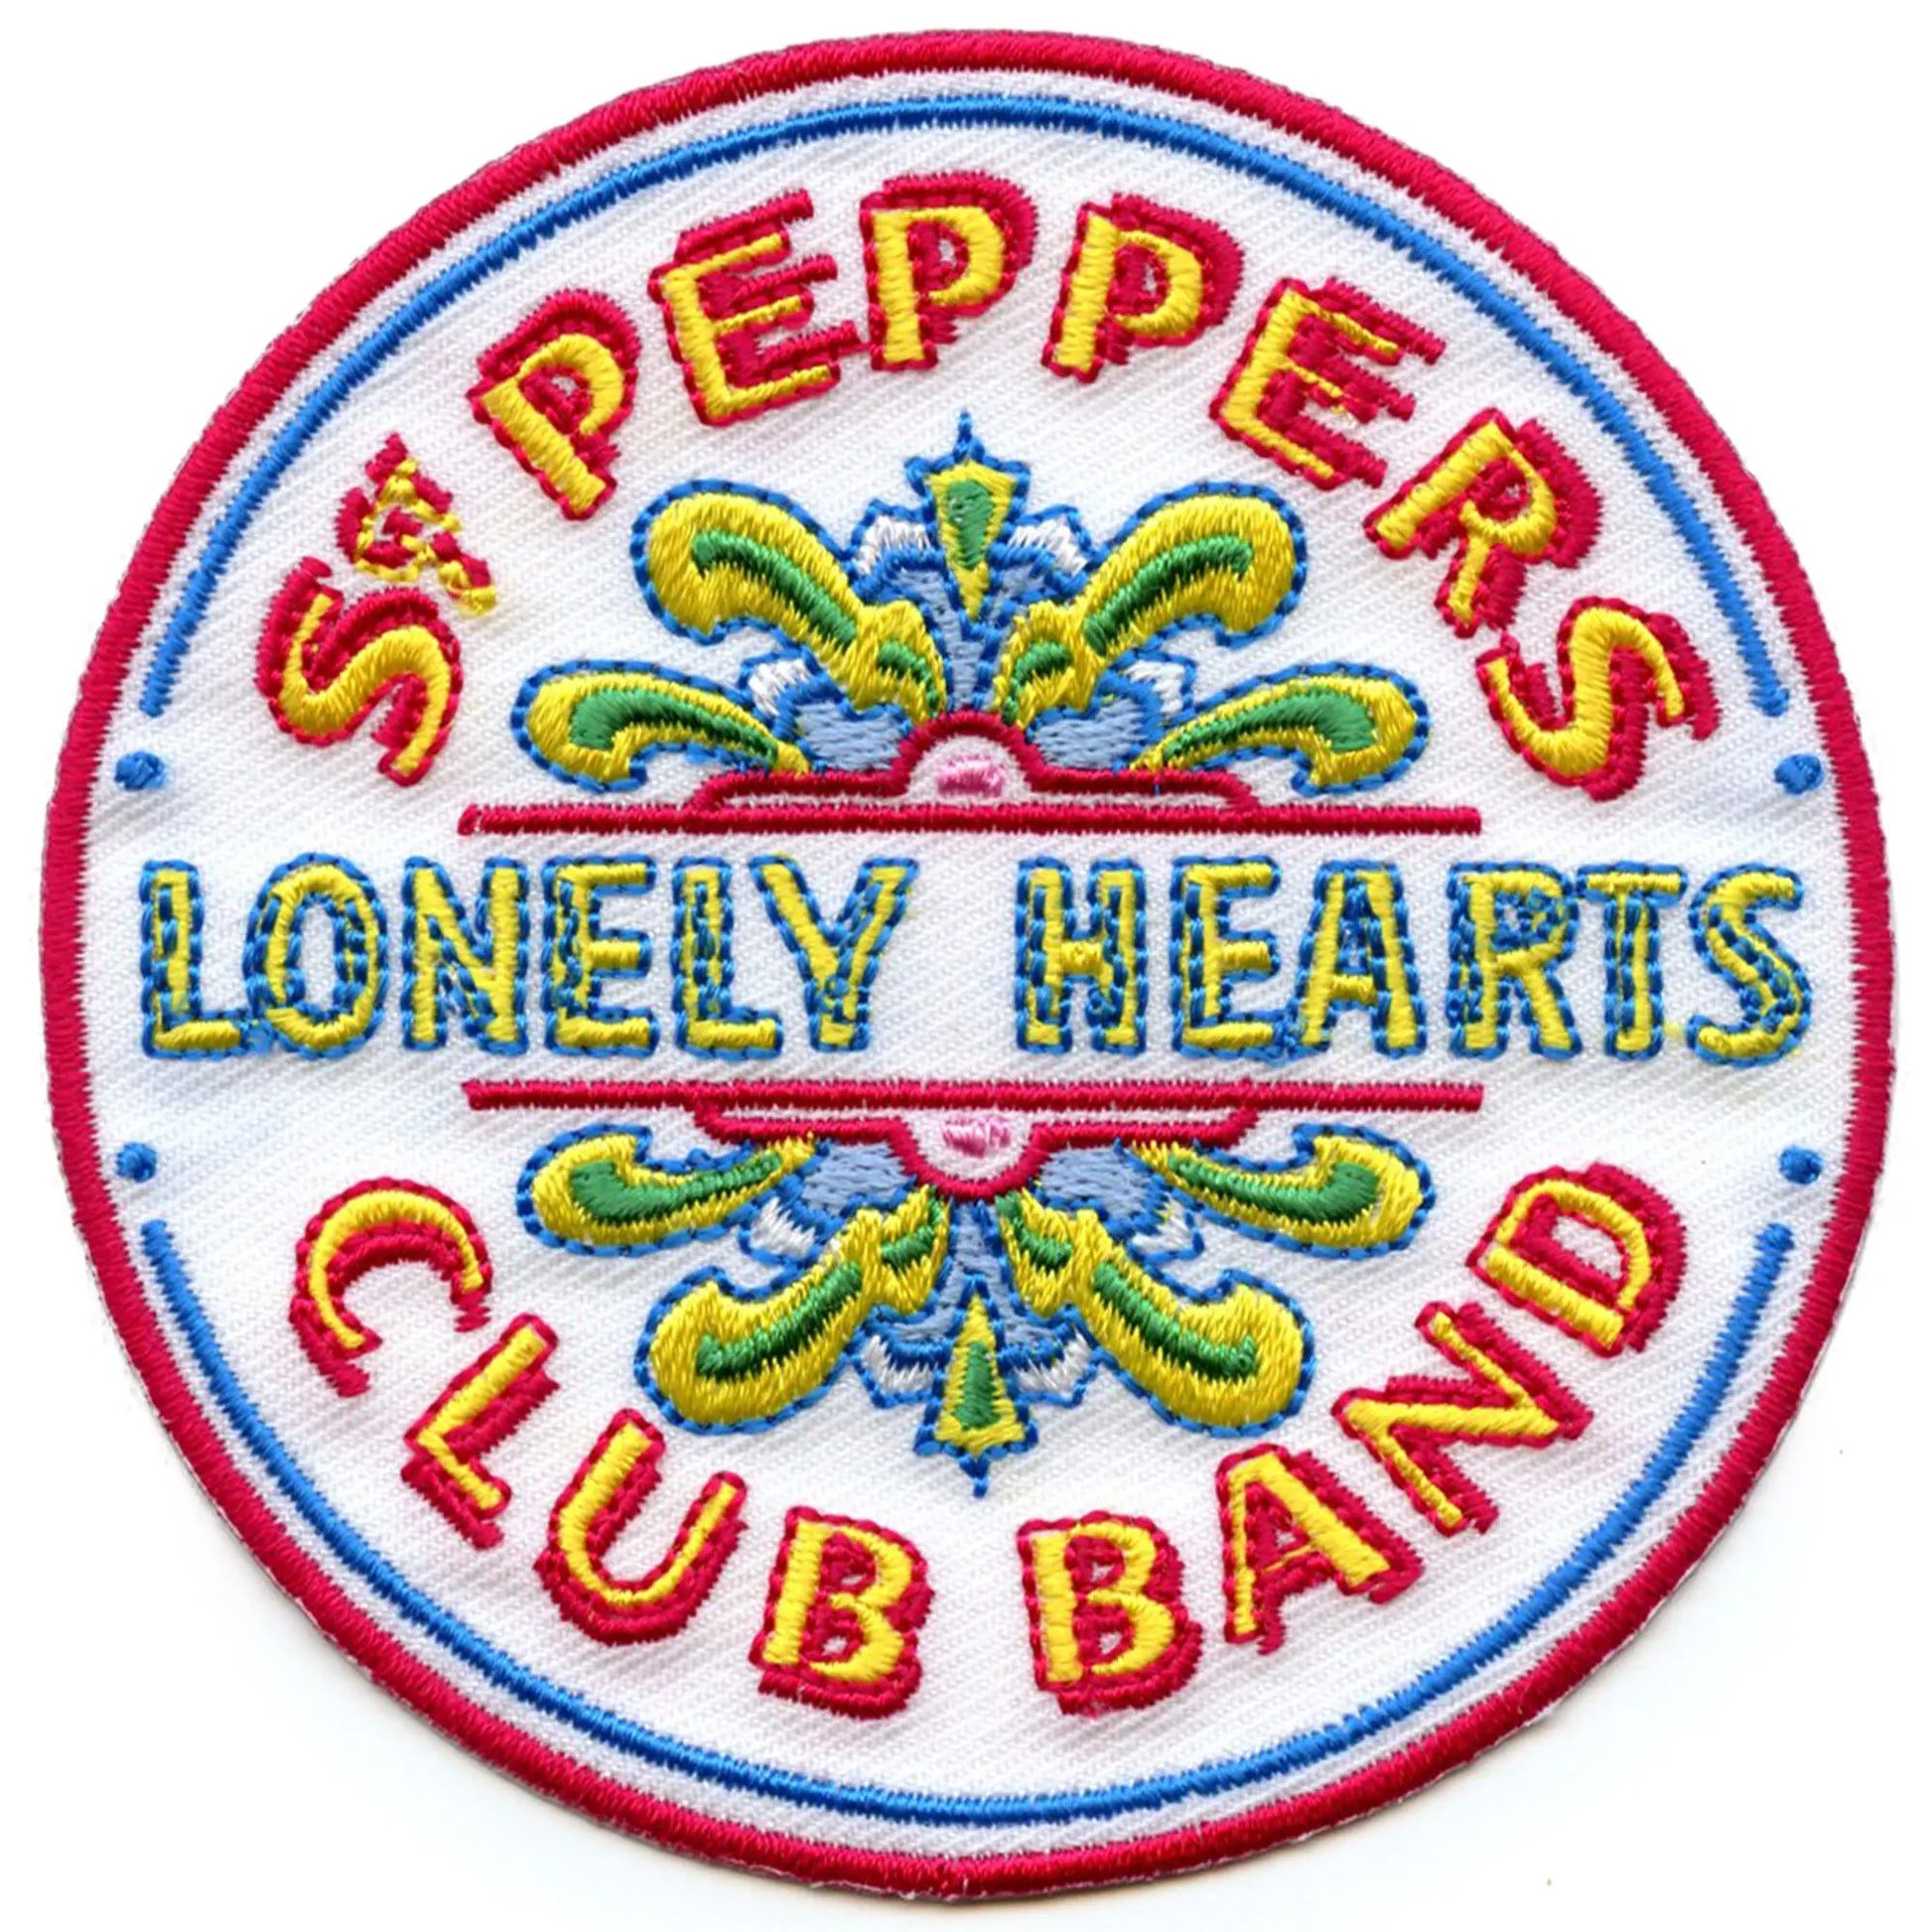 The Beatles Sgt Peppers Club Patch Iconic Rock Band Embroidered Iron On